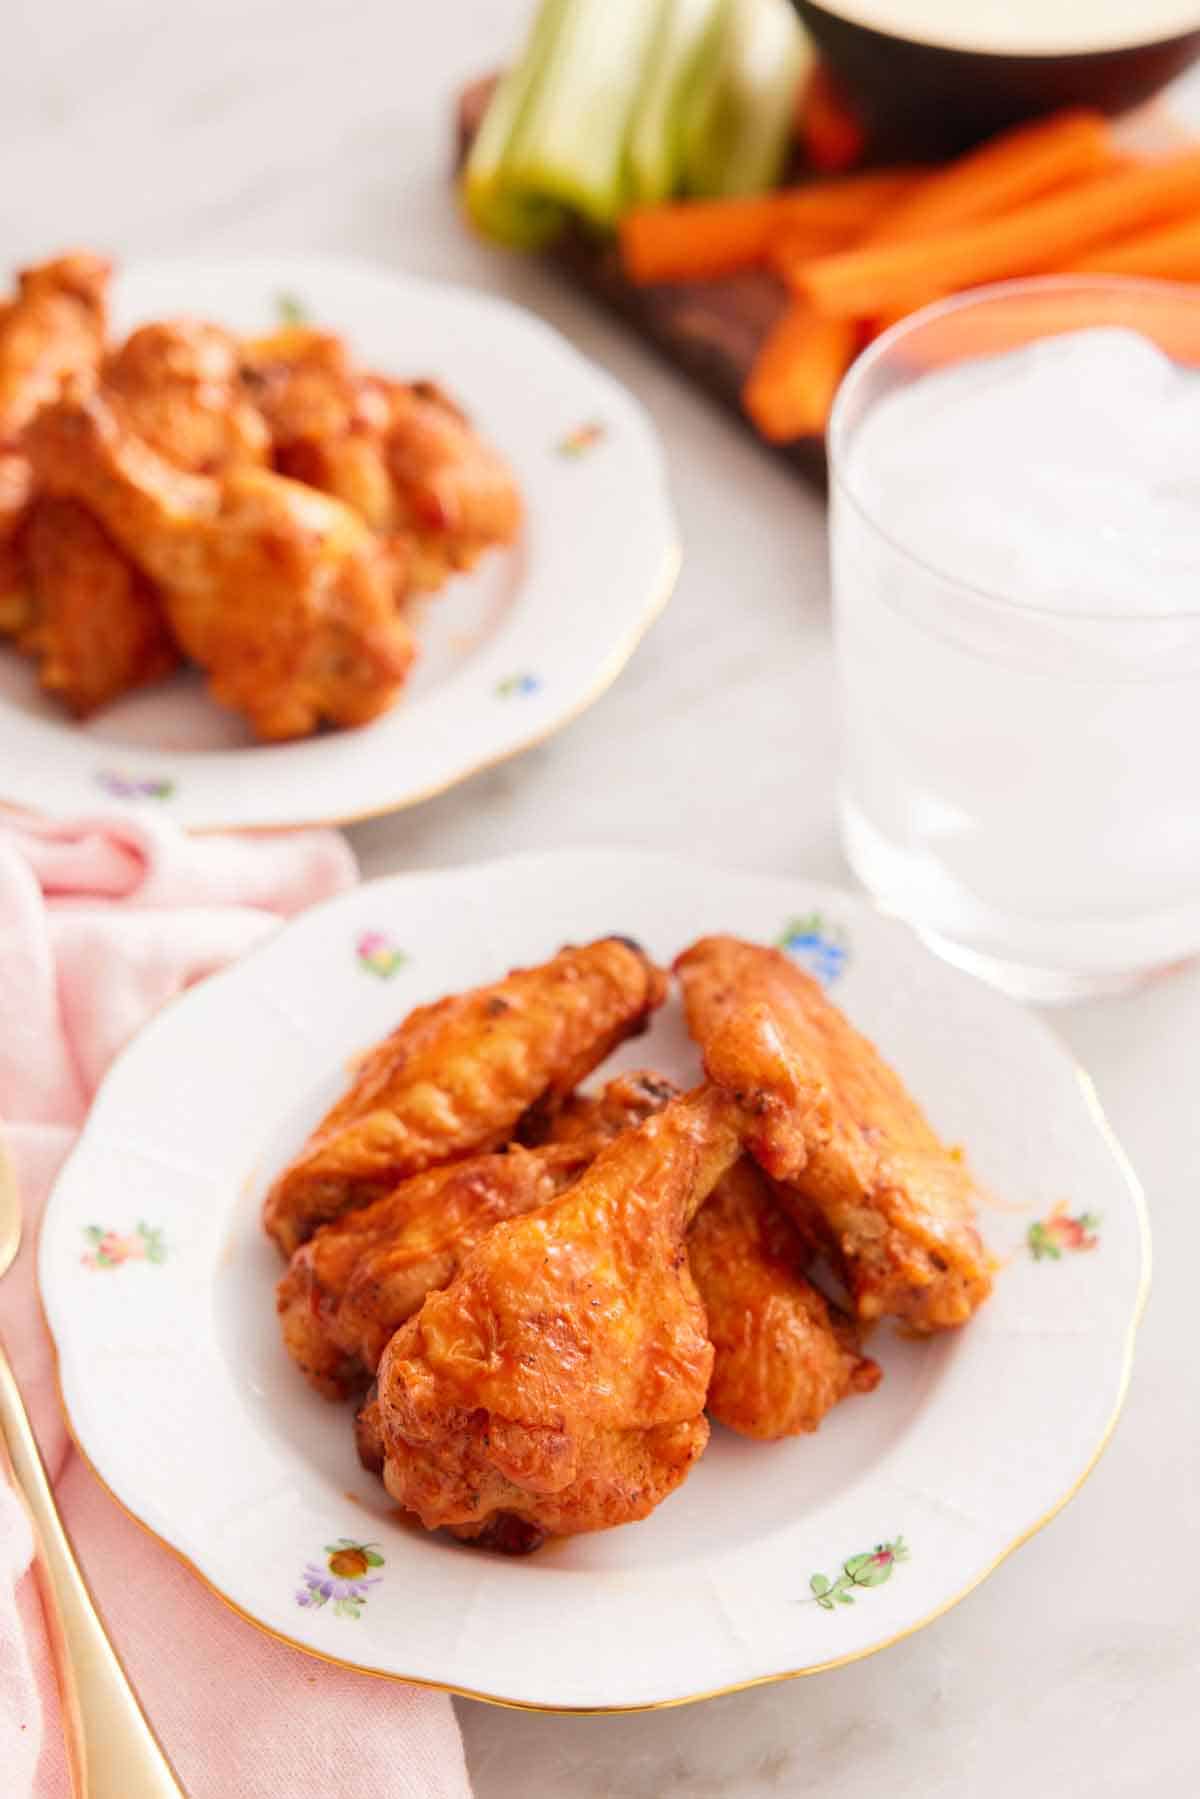 A plate with a couple of air fryer chicken wings with a glass of ice water, a plate of more wings, and a board with celery and carrots in the background.